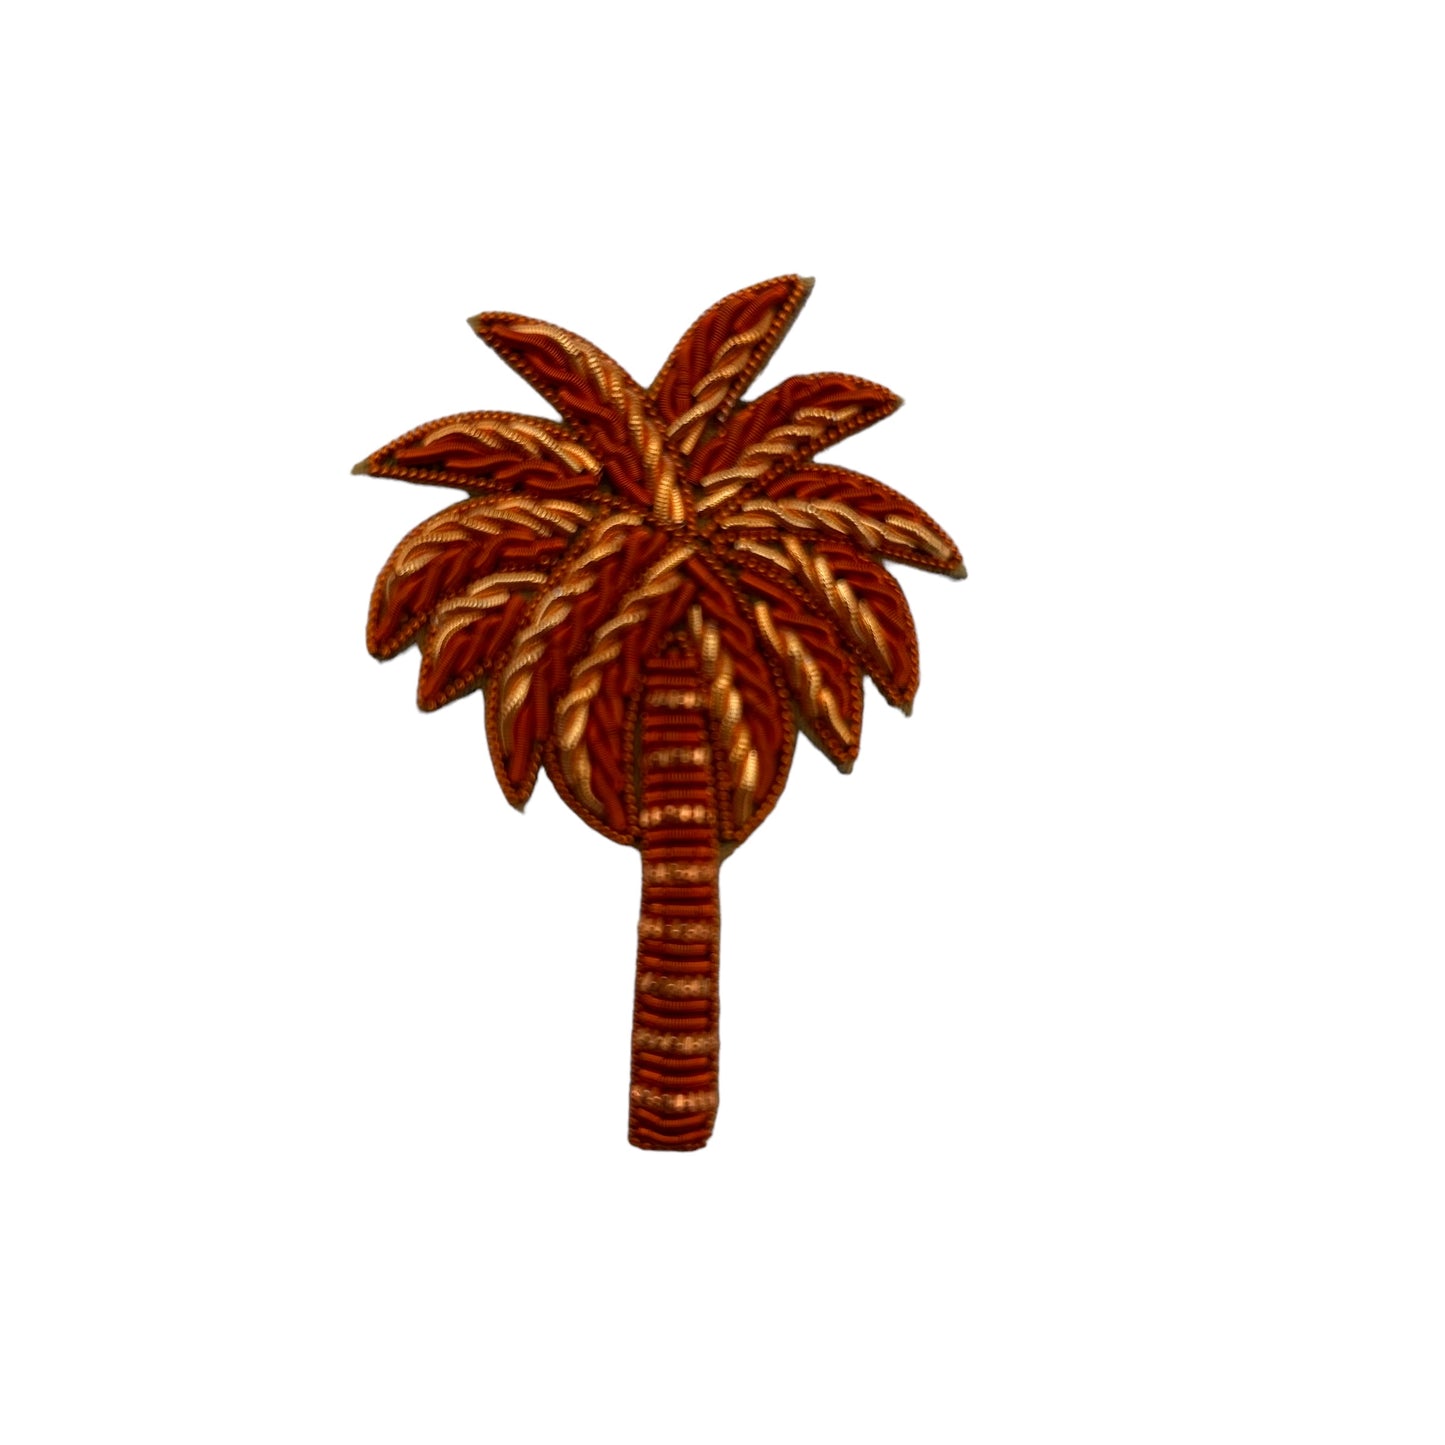 Tokyo socks in mint cantaloupe a coral palm tree brooch